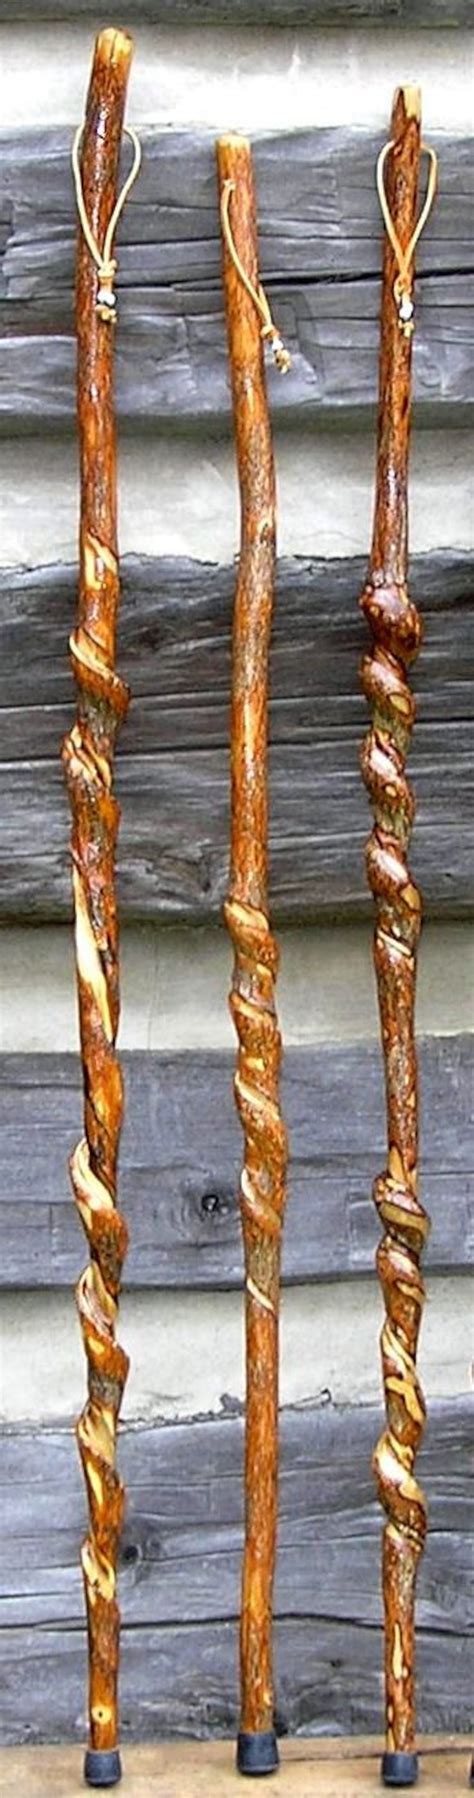 Curled/Twisted Walking Sticks 50-55 Inches Tall Etsy | Etsy